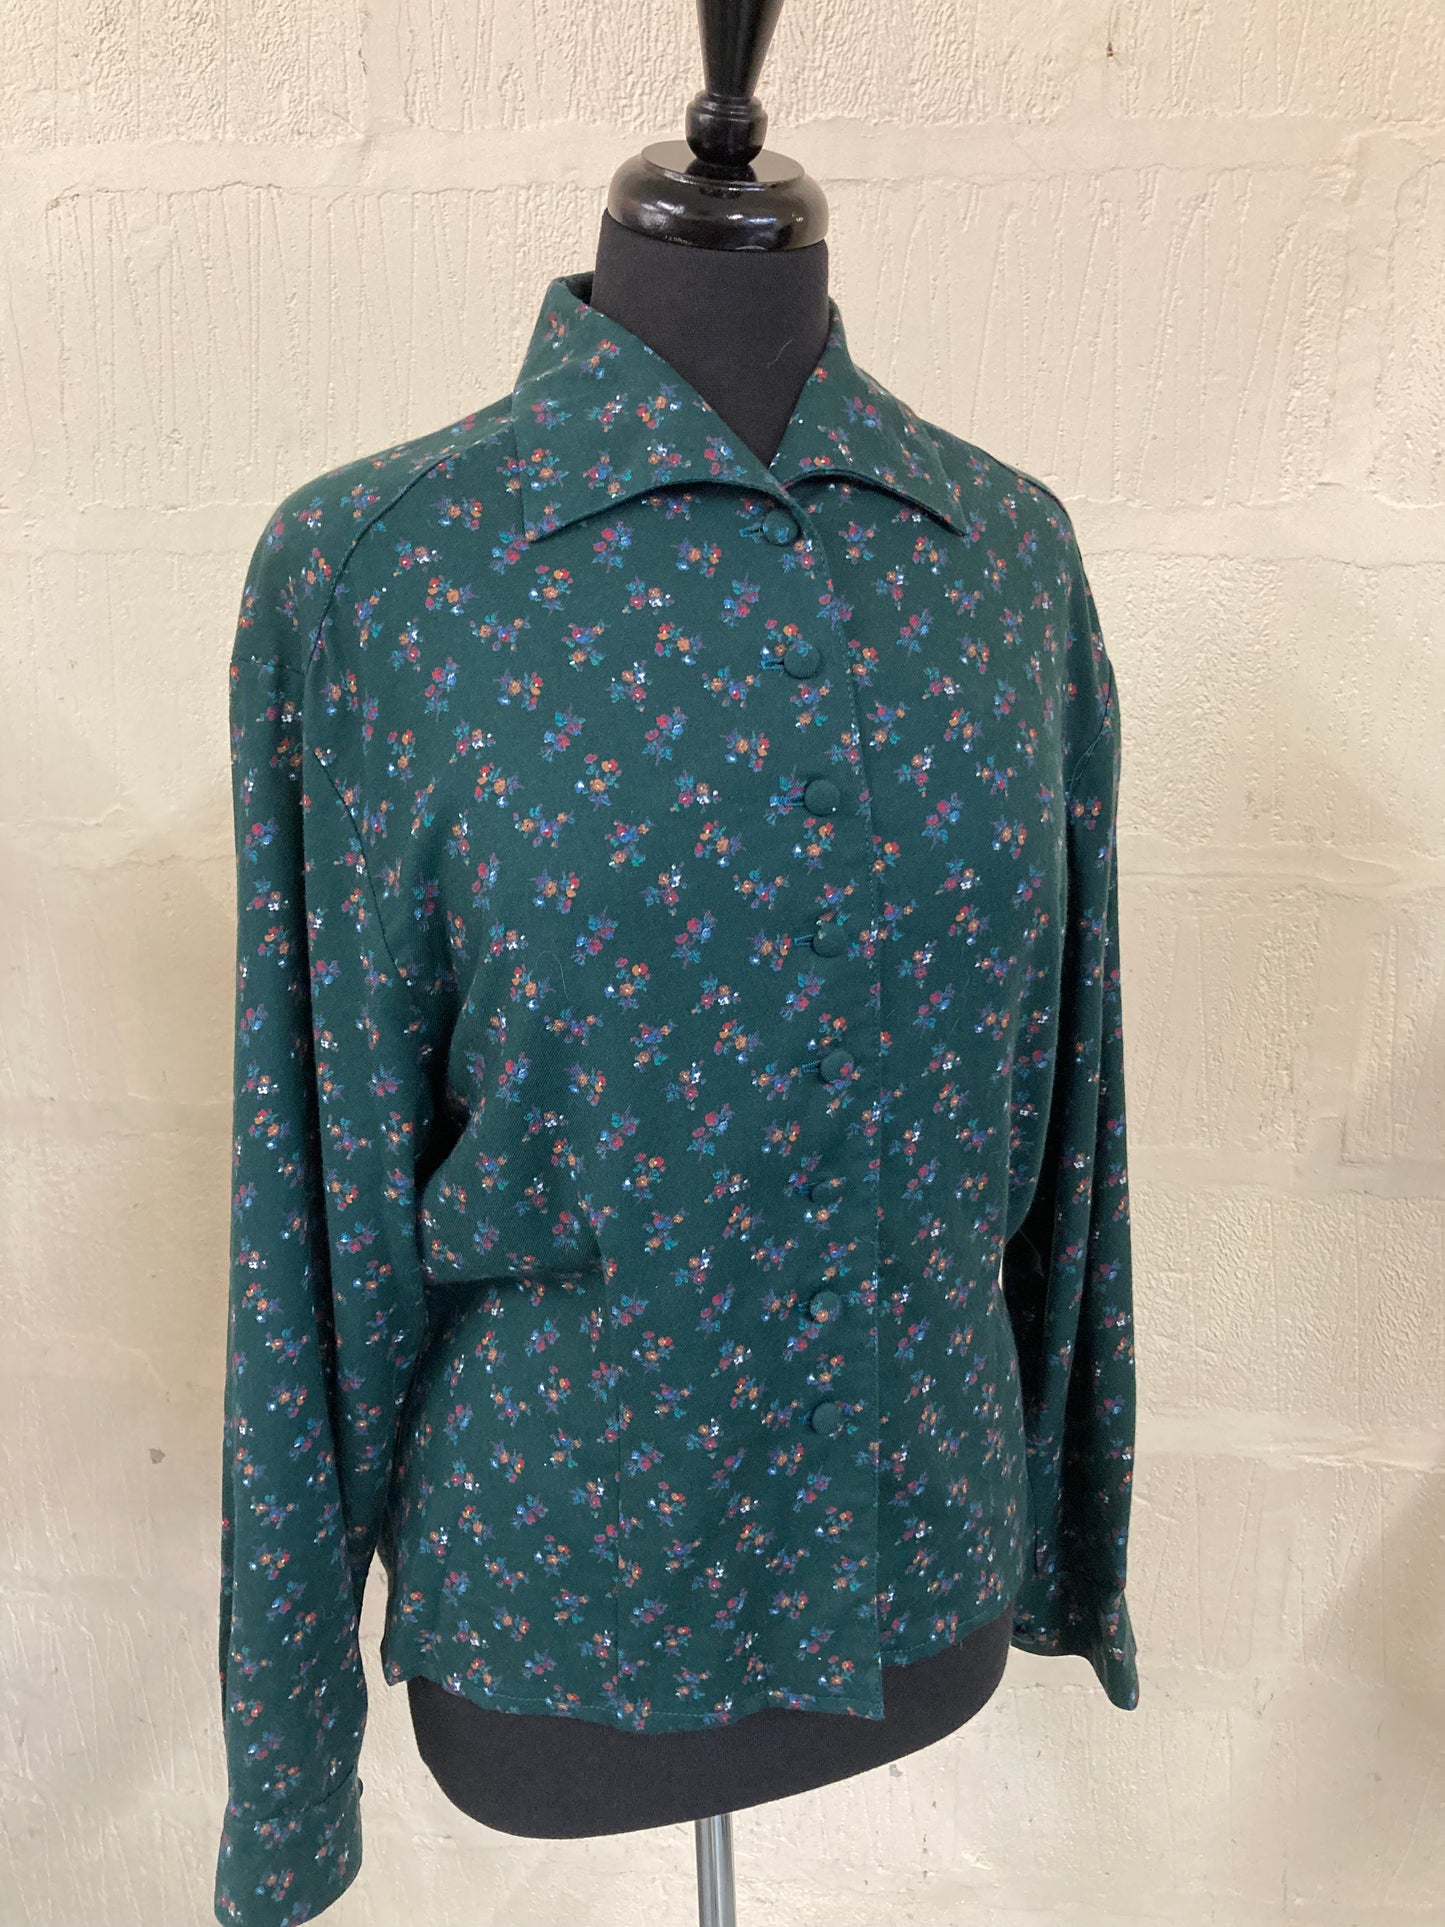 1980s Green with Floral Pattern Wool Blouse Size 14